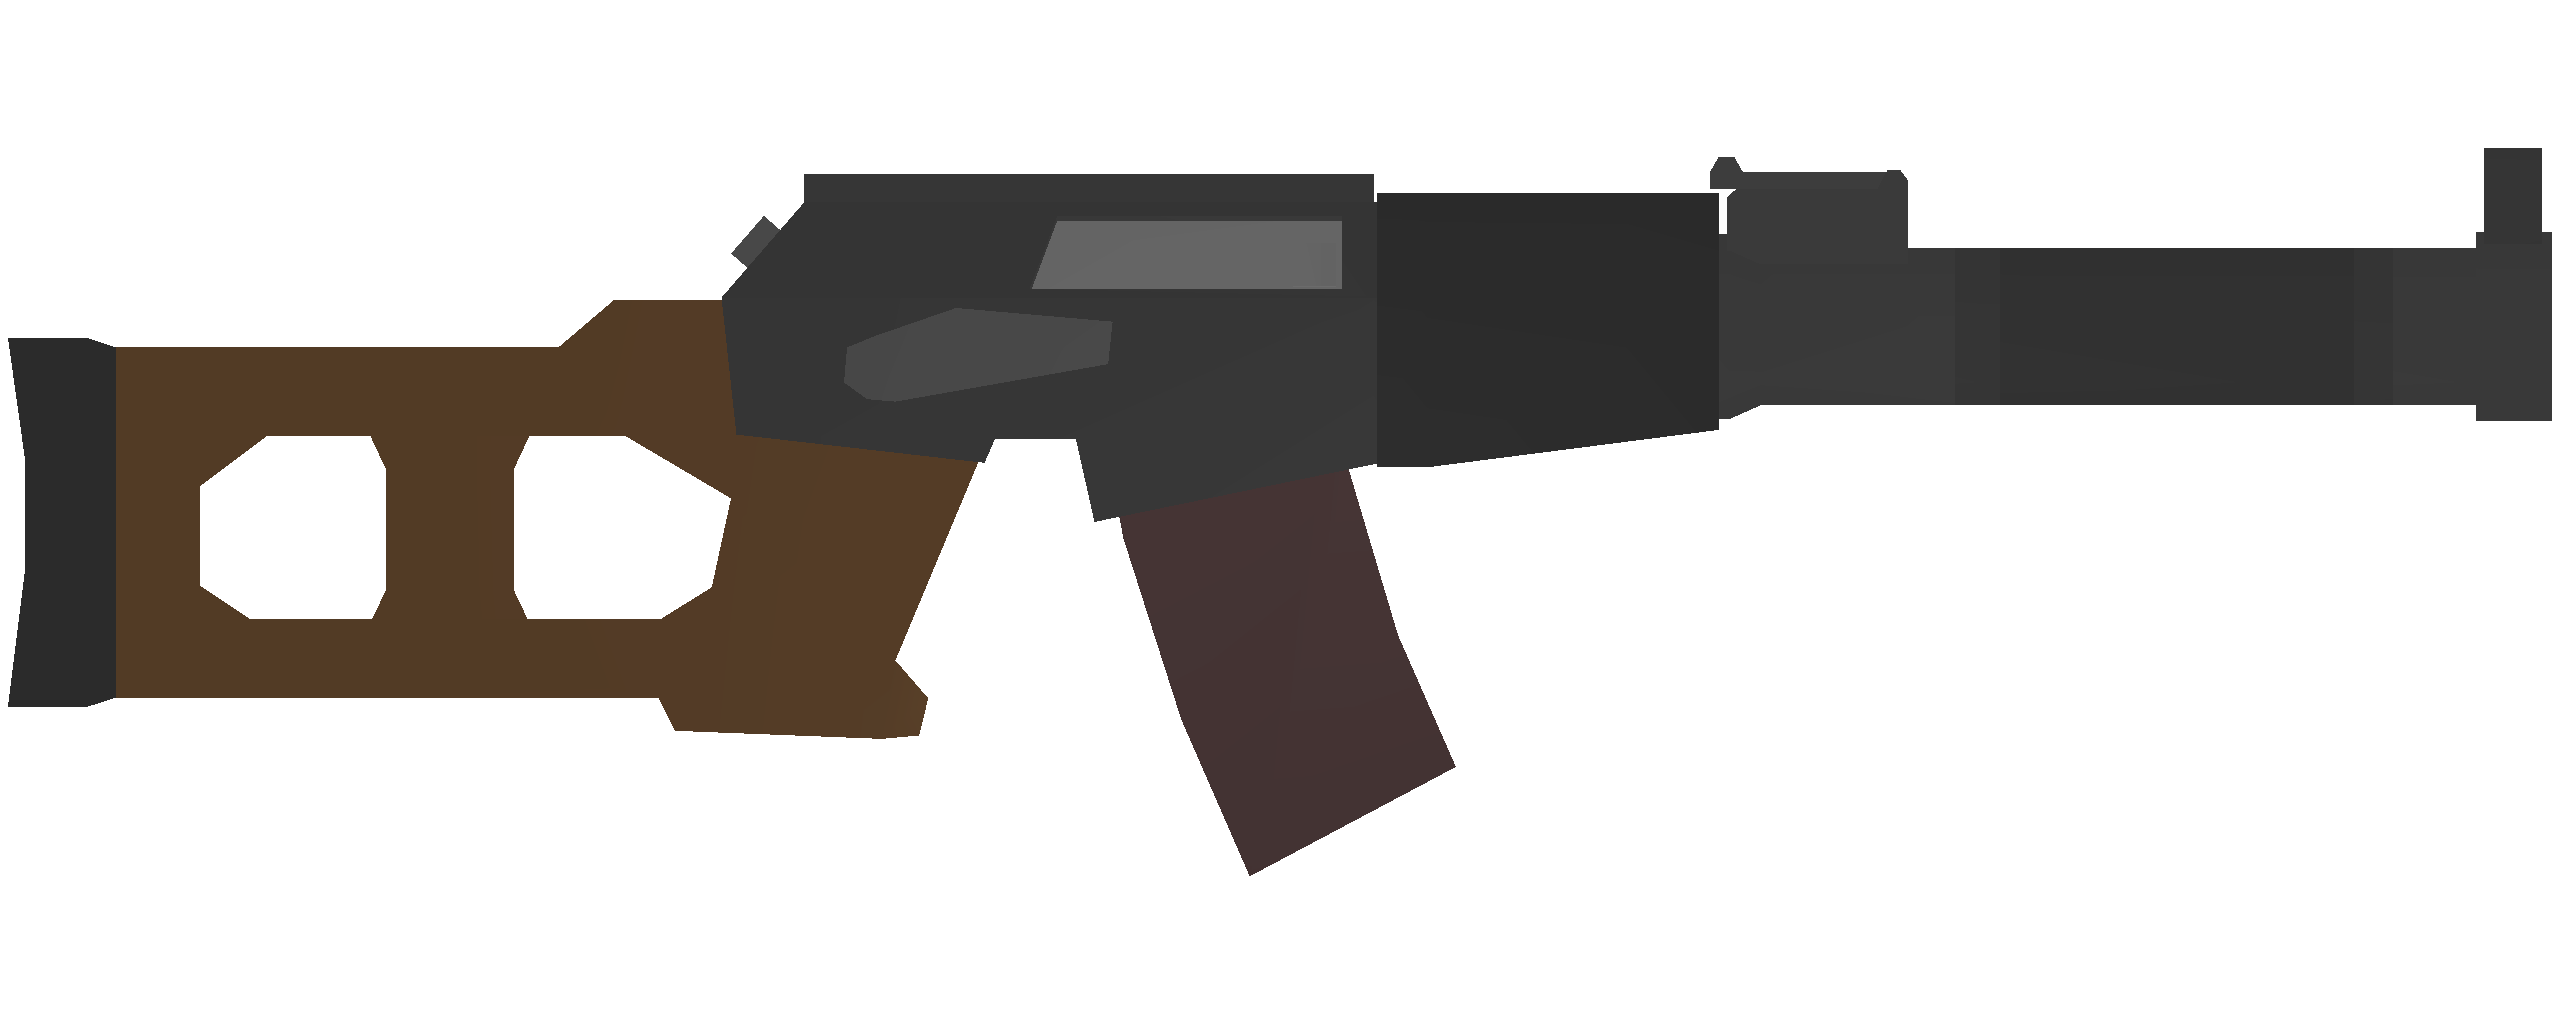 Unturned - Kuwait Items Redux + ID List for Magazines and Attachments - Sniper Rifles - 2584109